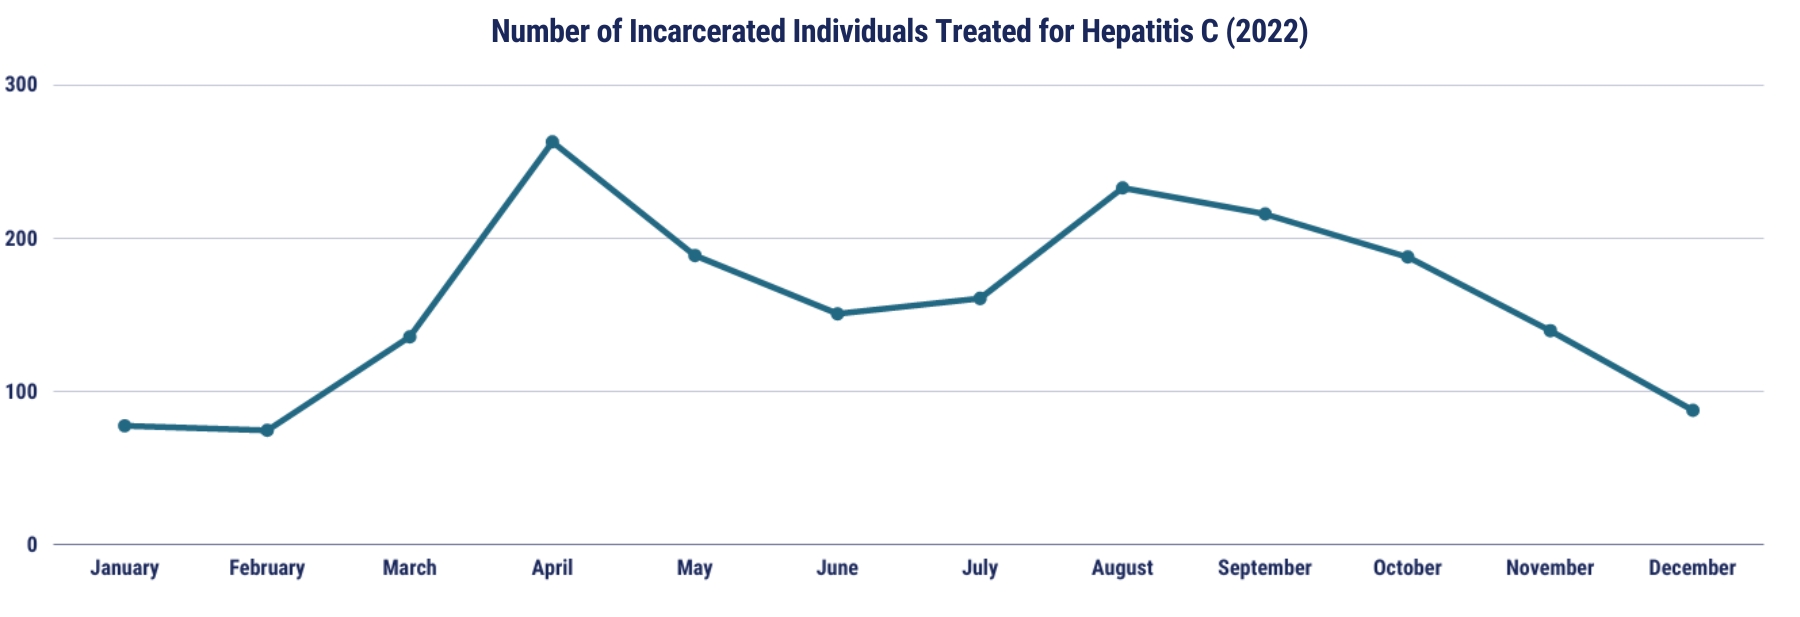 Number of Incarcerated Individuals Treated for Hepatitis C. 2022 stared and ended with less than 100 cases. There was a spike in April with a little more than 250 cases. We then saw treatments trend down with a small spike in August with a little more than 200 cases before it steady decreased back to less than 100 cases in December. 